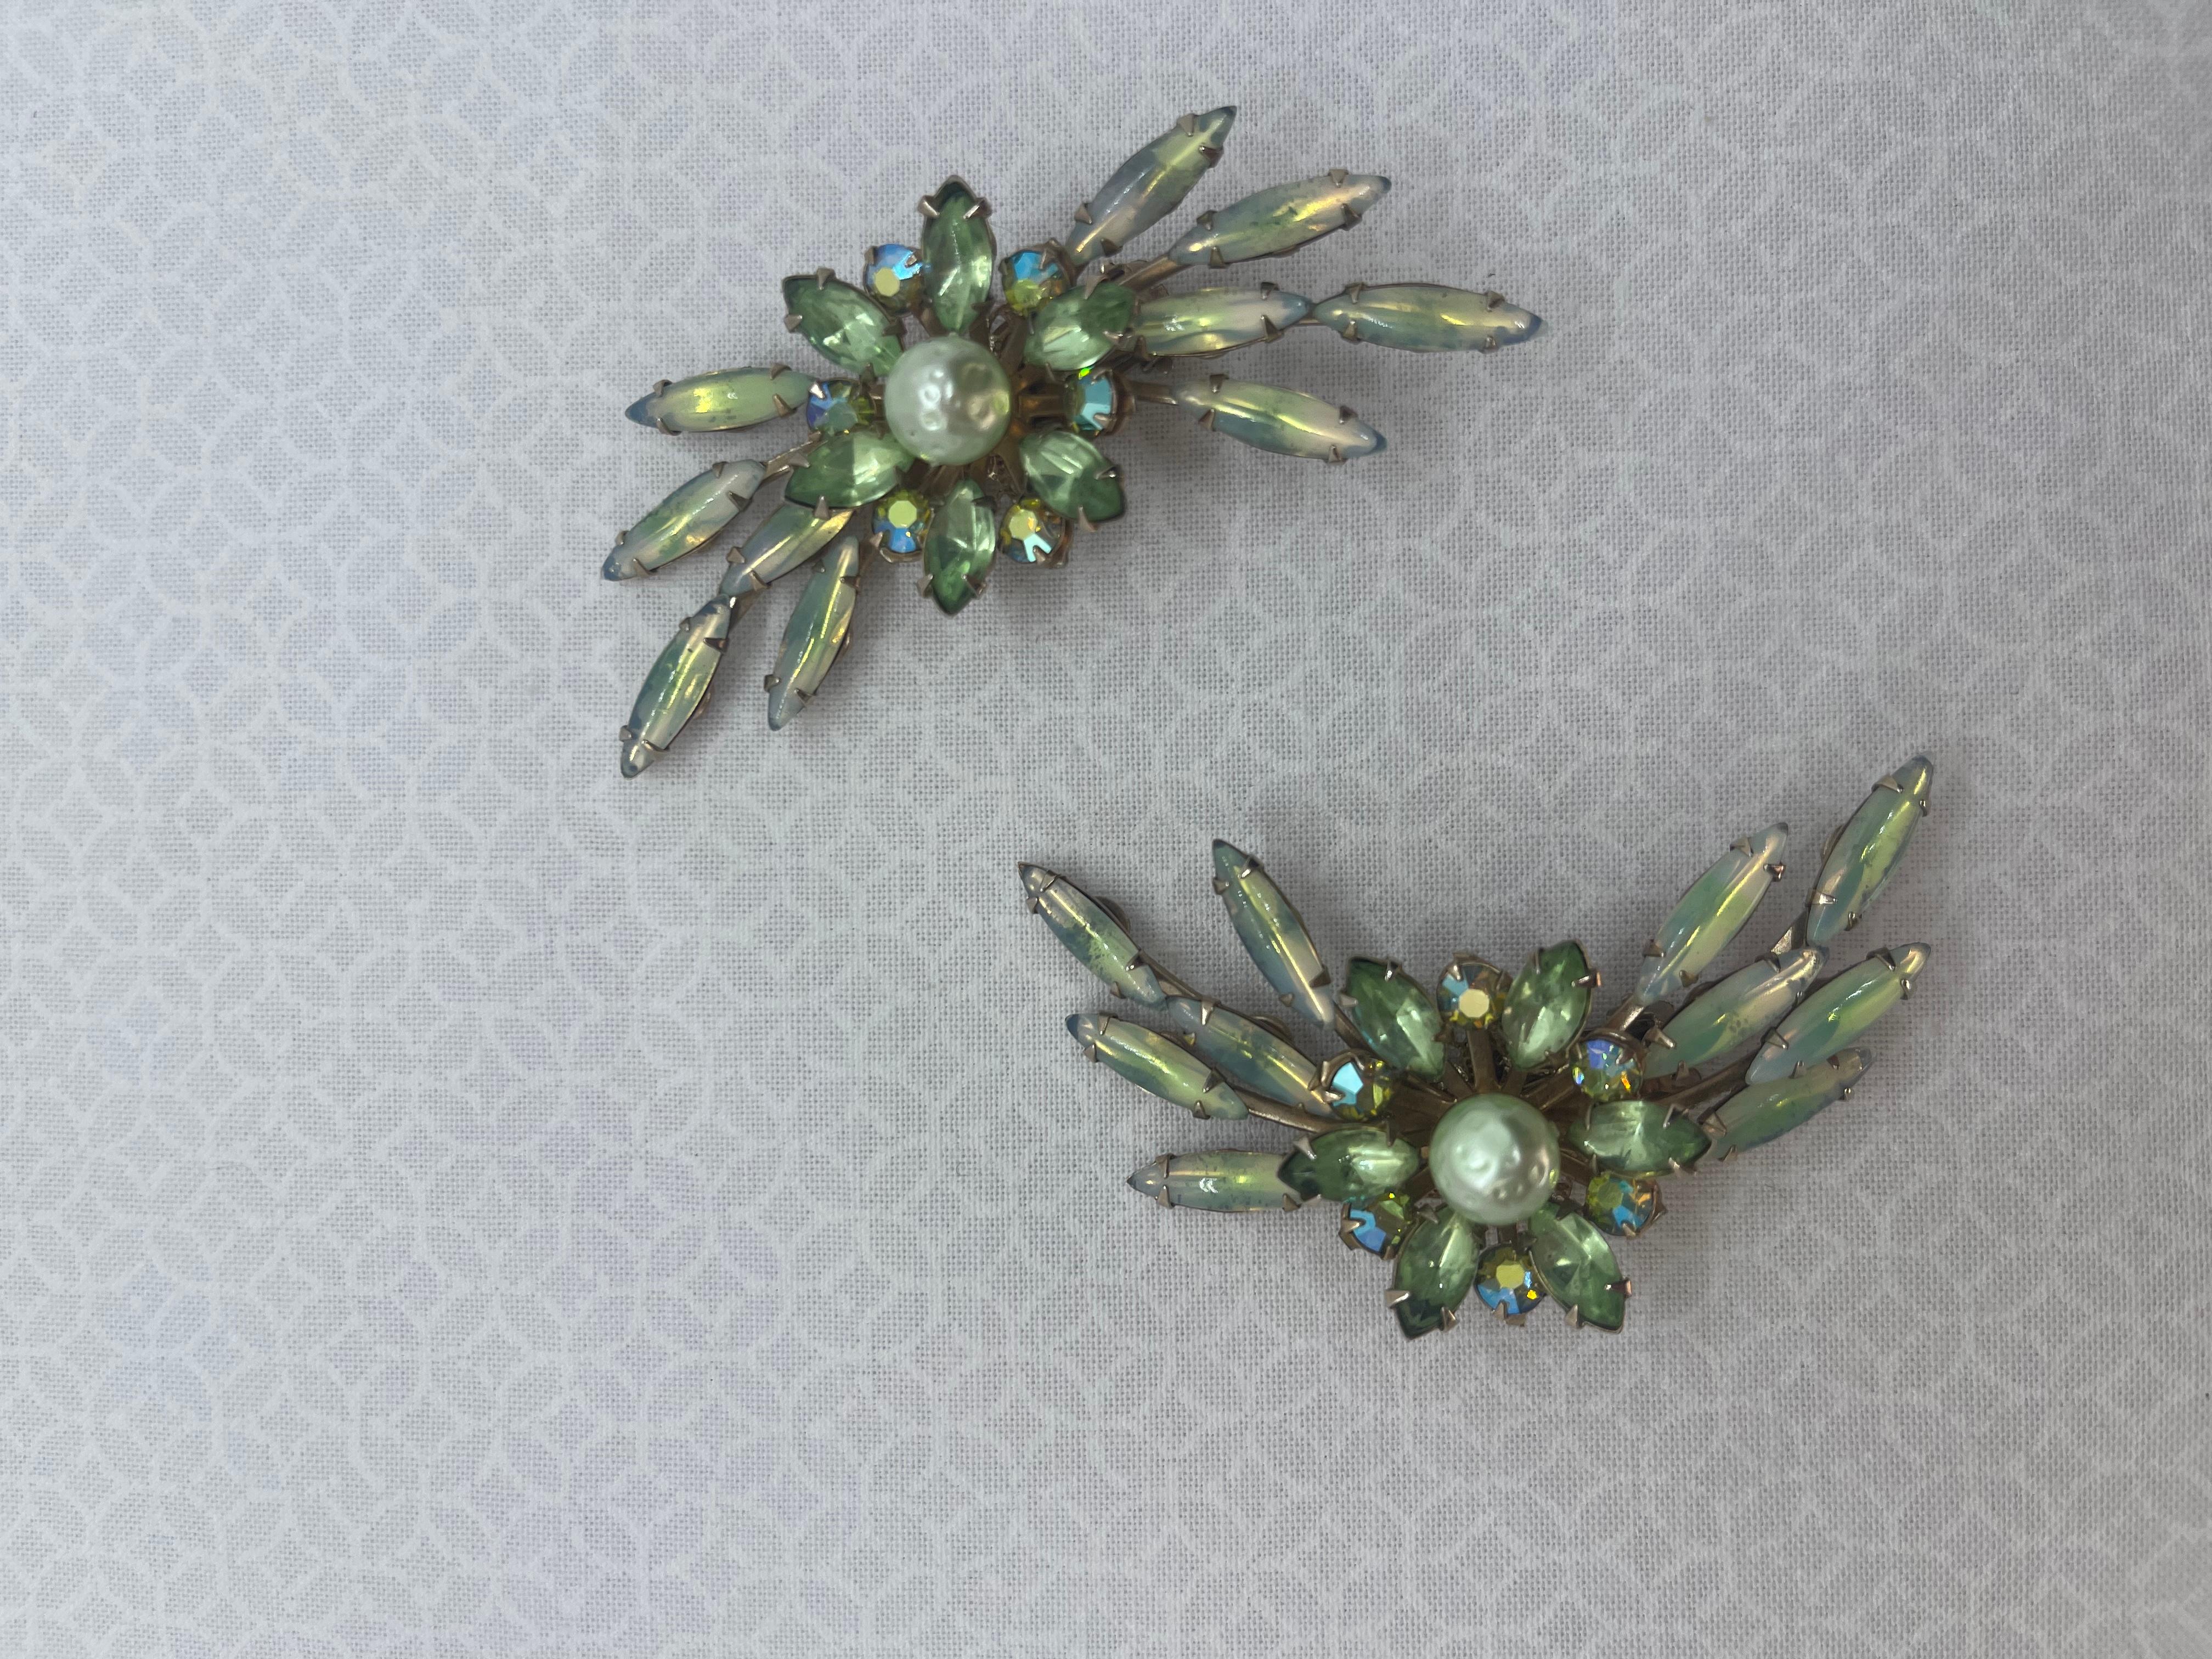 Knock 'em dead is the statement these beautiful one-of-a-kind earrings make. The aurora borealis shimmer and shine in this elegant mint green color.  There is a mixed cut of both round and marquise cut aurora borealis.

These earrings have so much